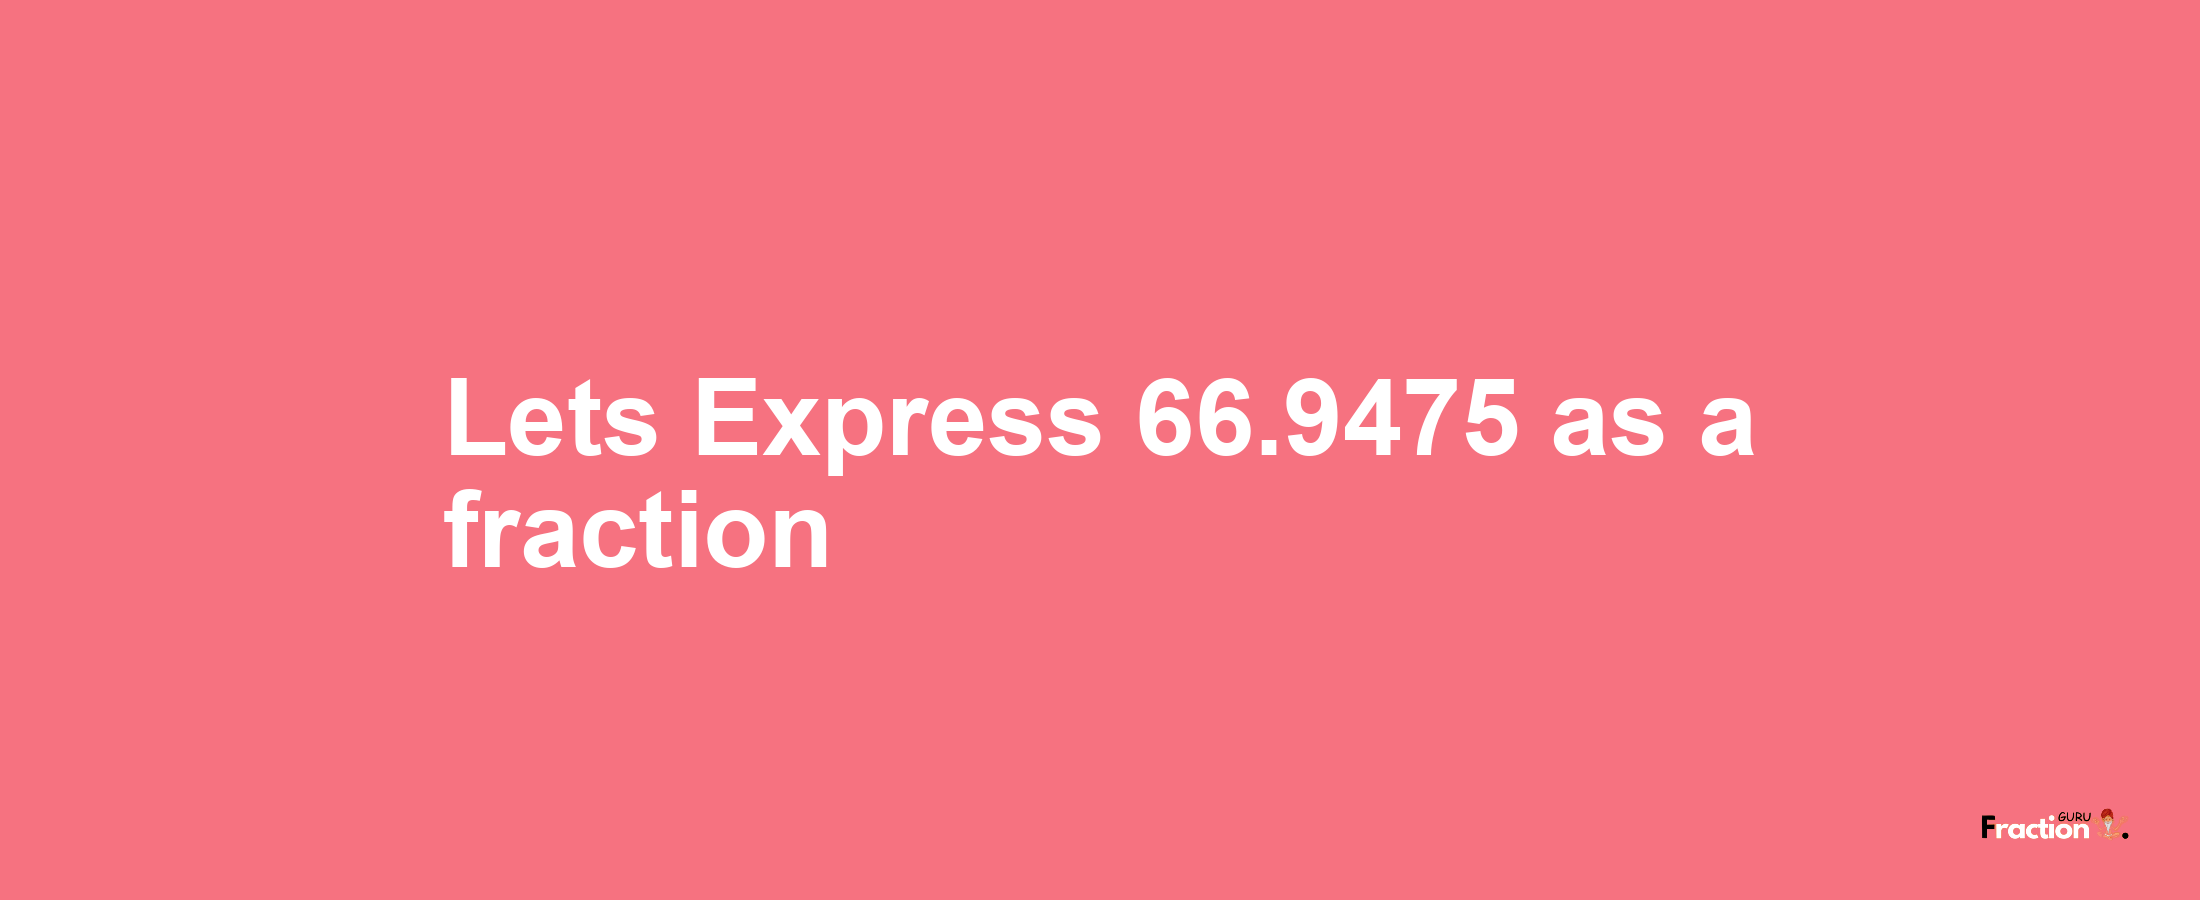 Lets Express 66.9475 as afraction